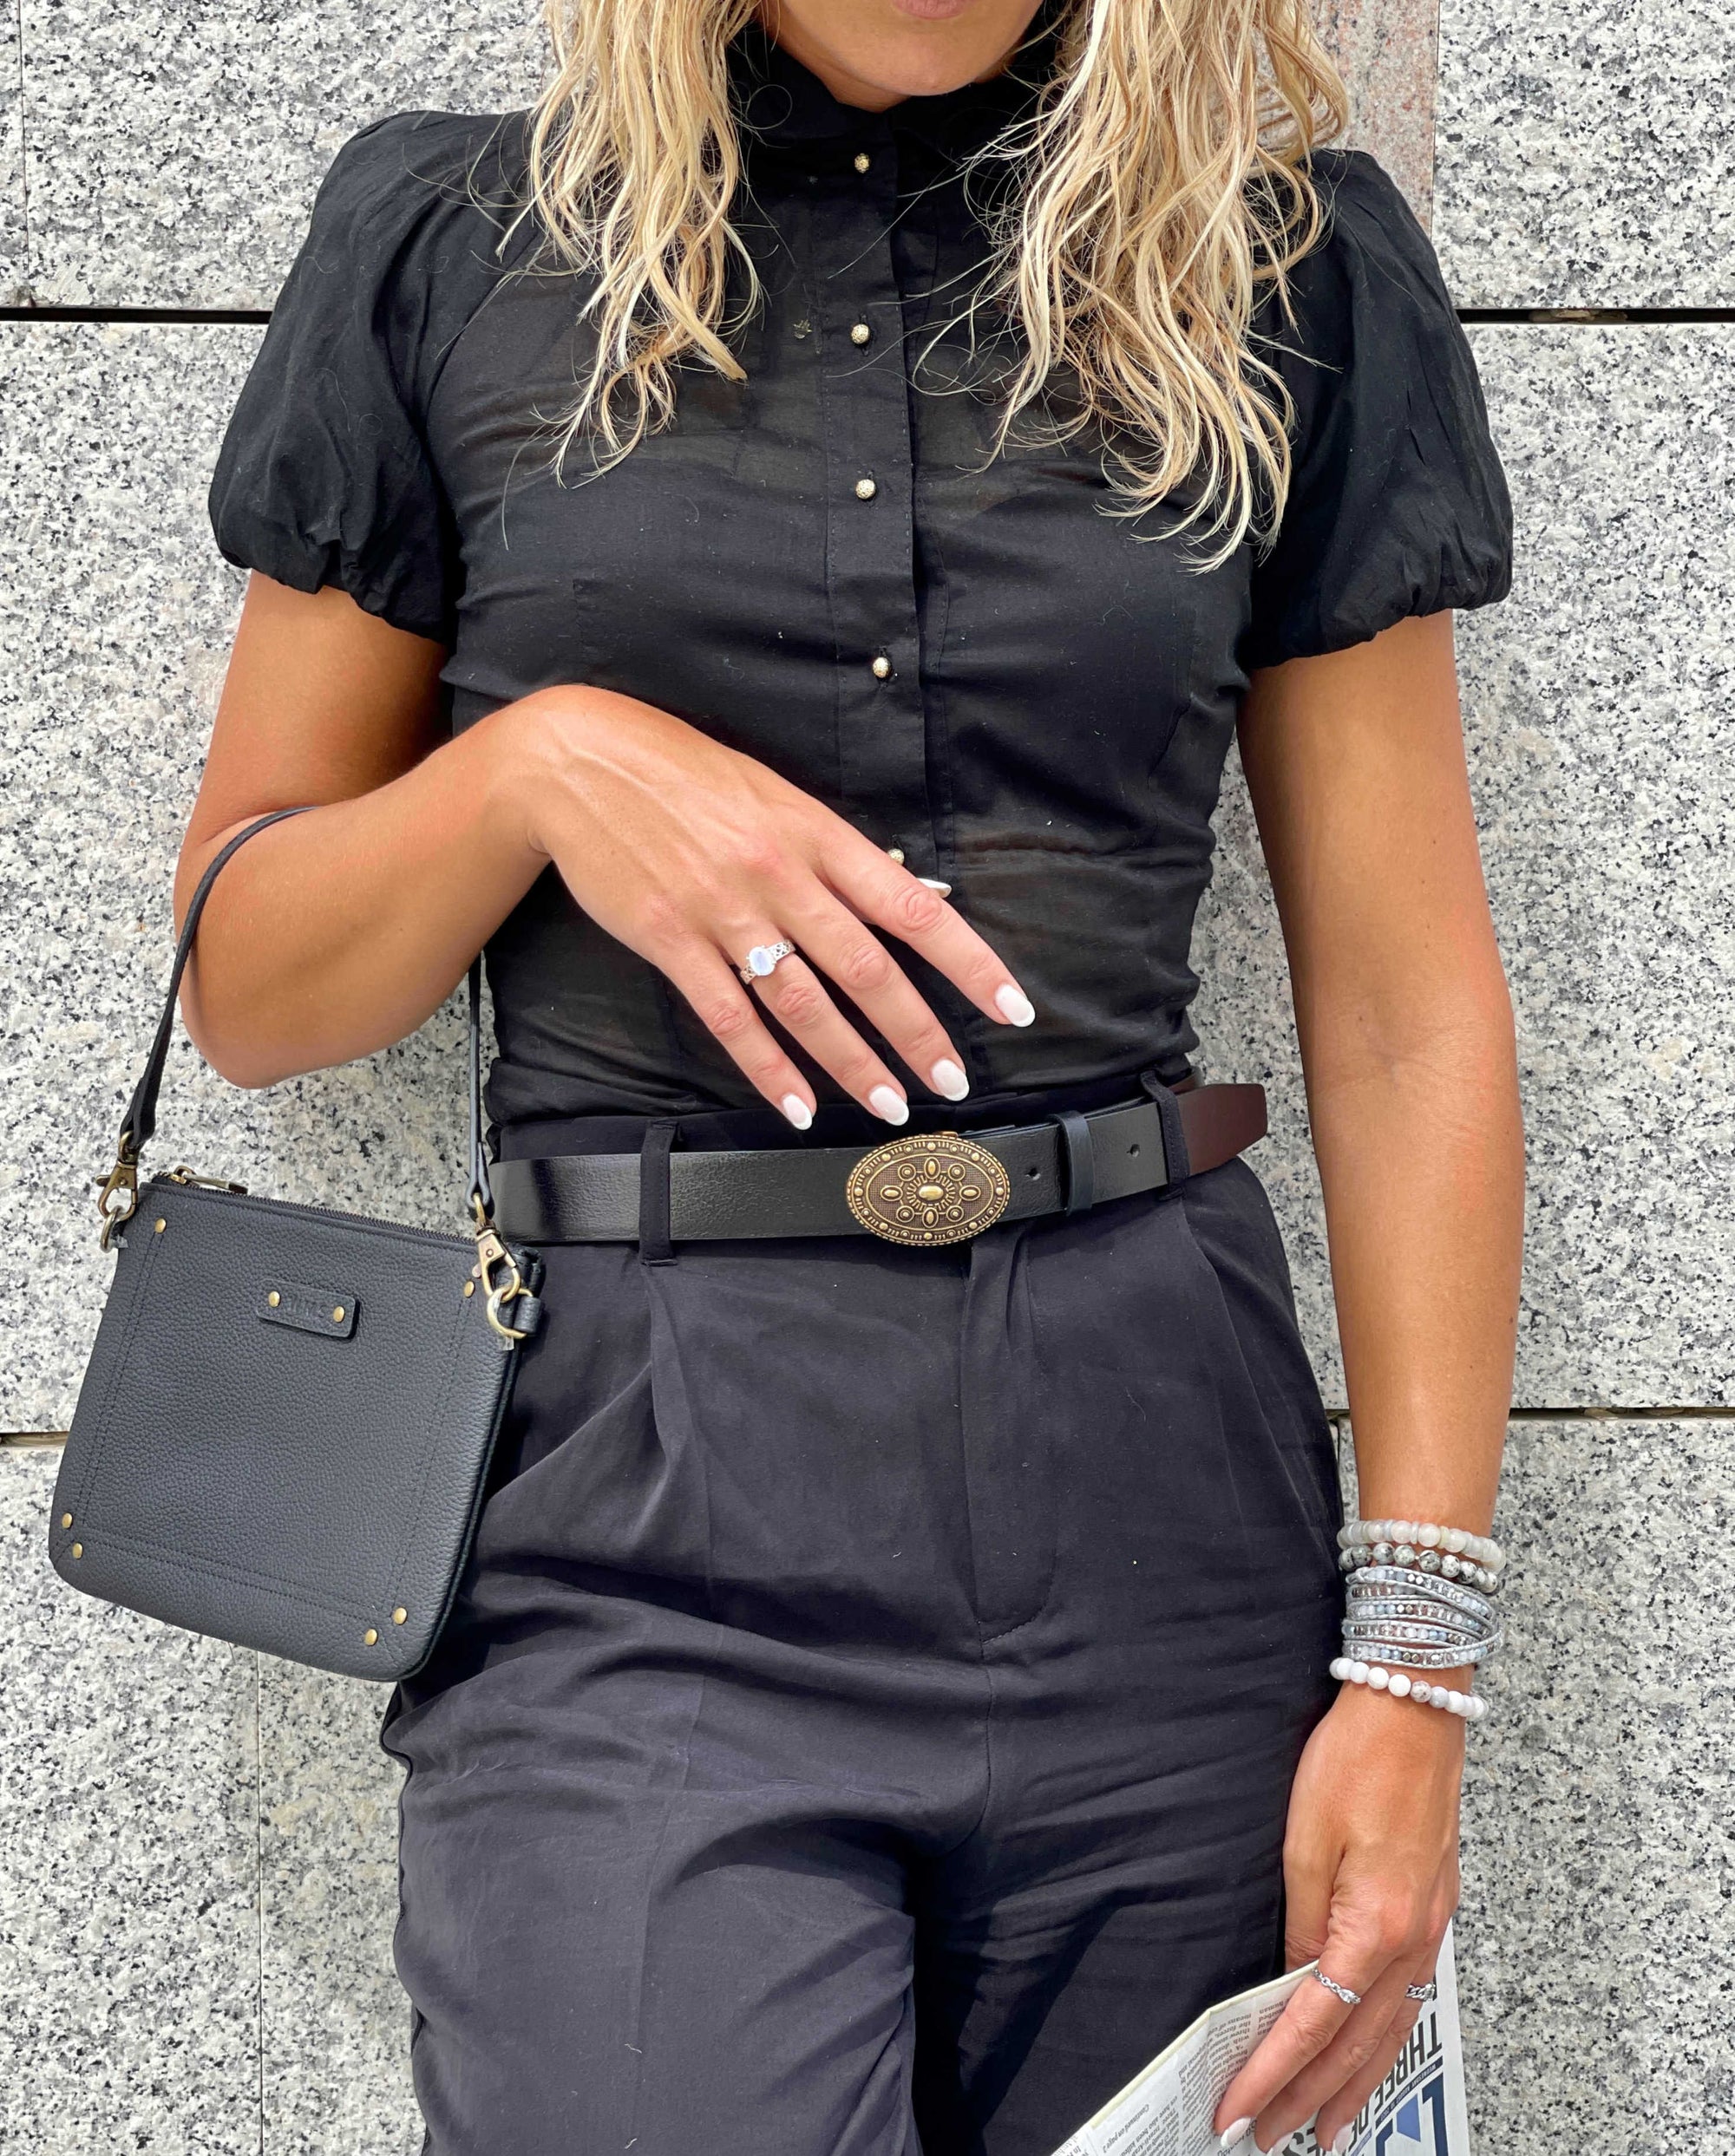 With My Sands | Leather belt | Leather pouch | Dear Charlotte buckle | Accessories Lifestyle